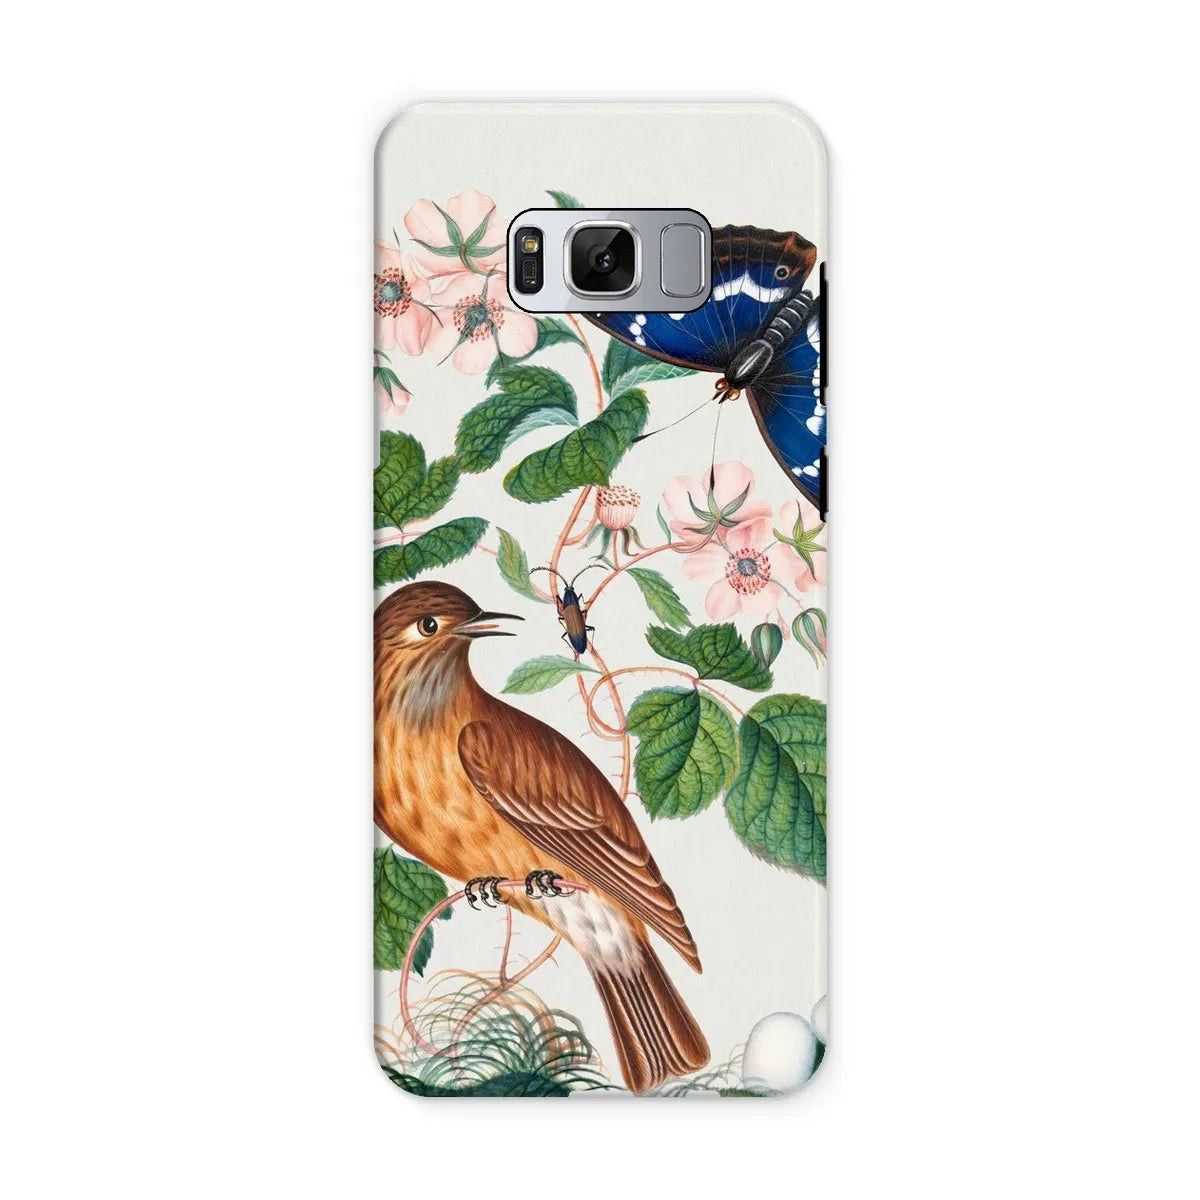 Flycatcher Emperor And Beetle - Art Phone Case - James Bolton - Samsung Galaxy S8 / Matte - Mobile Phone Cases